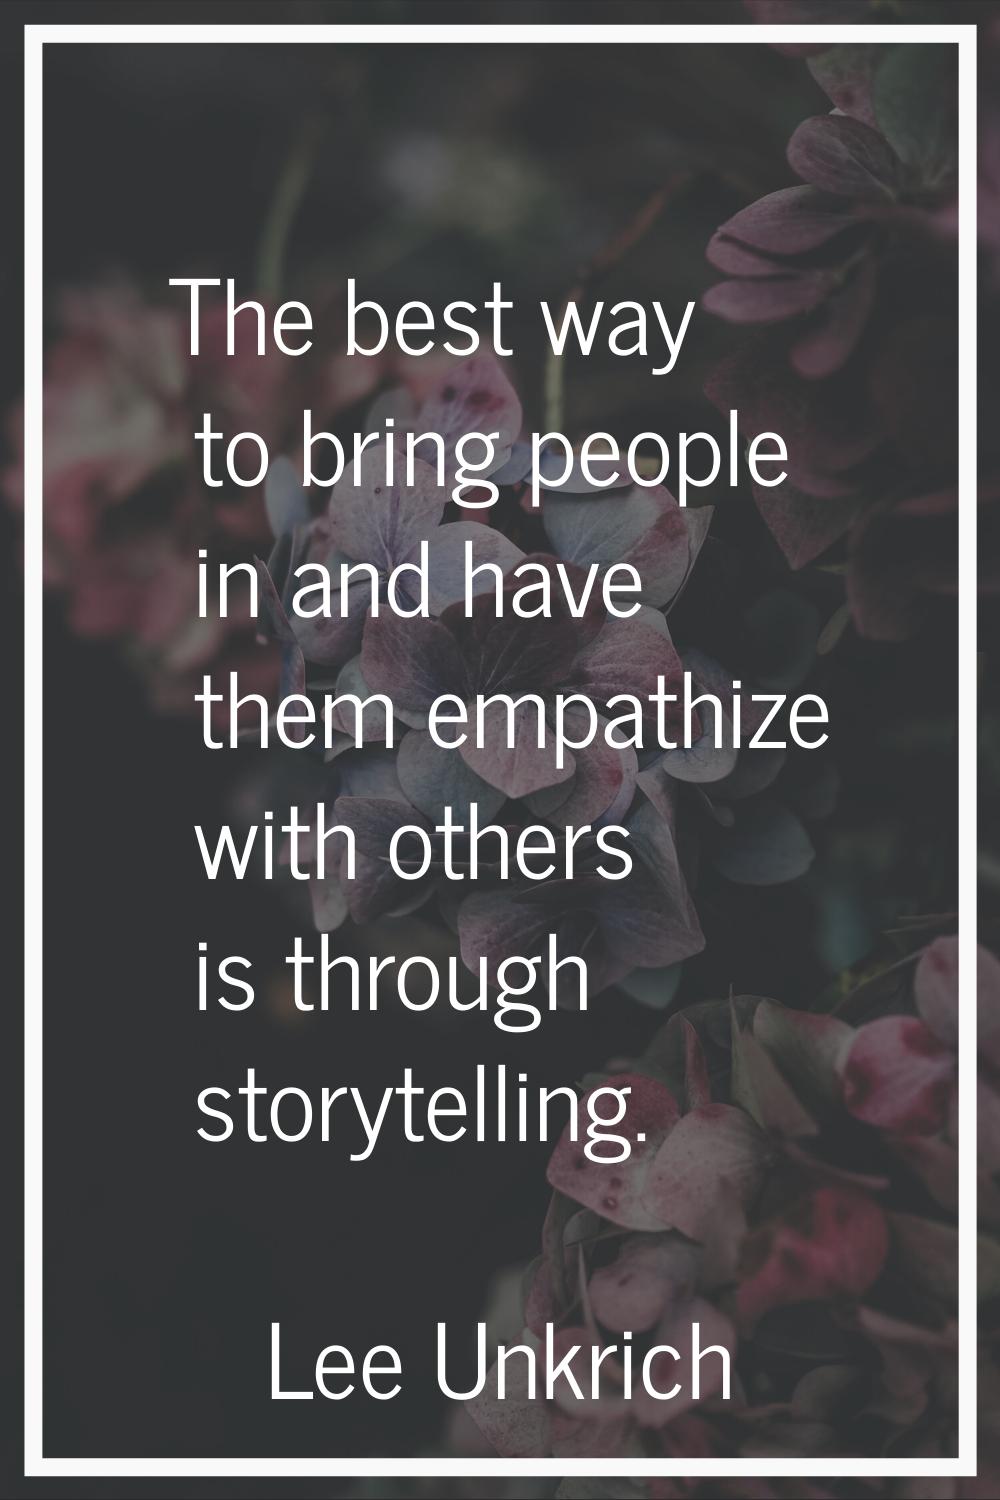 The best way to bring people in and have them empathize with others is through storytelling.